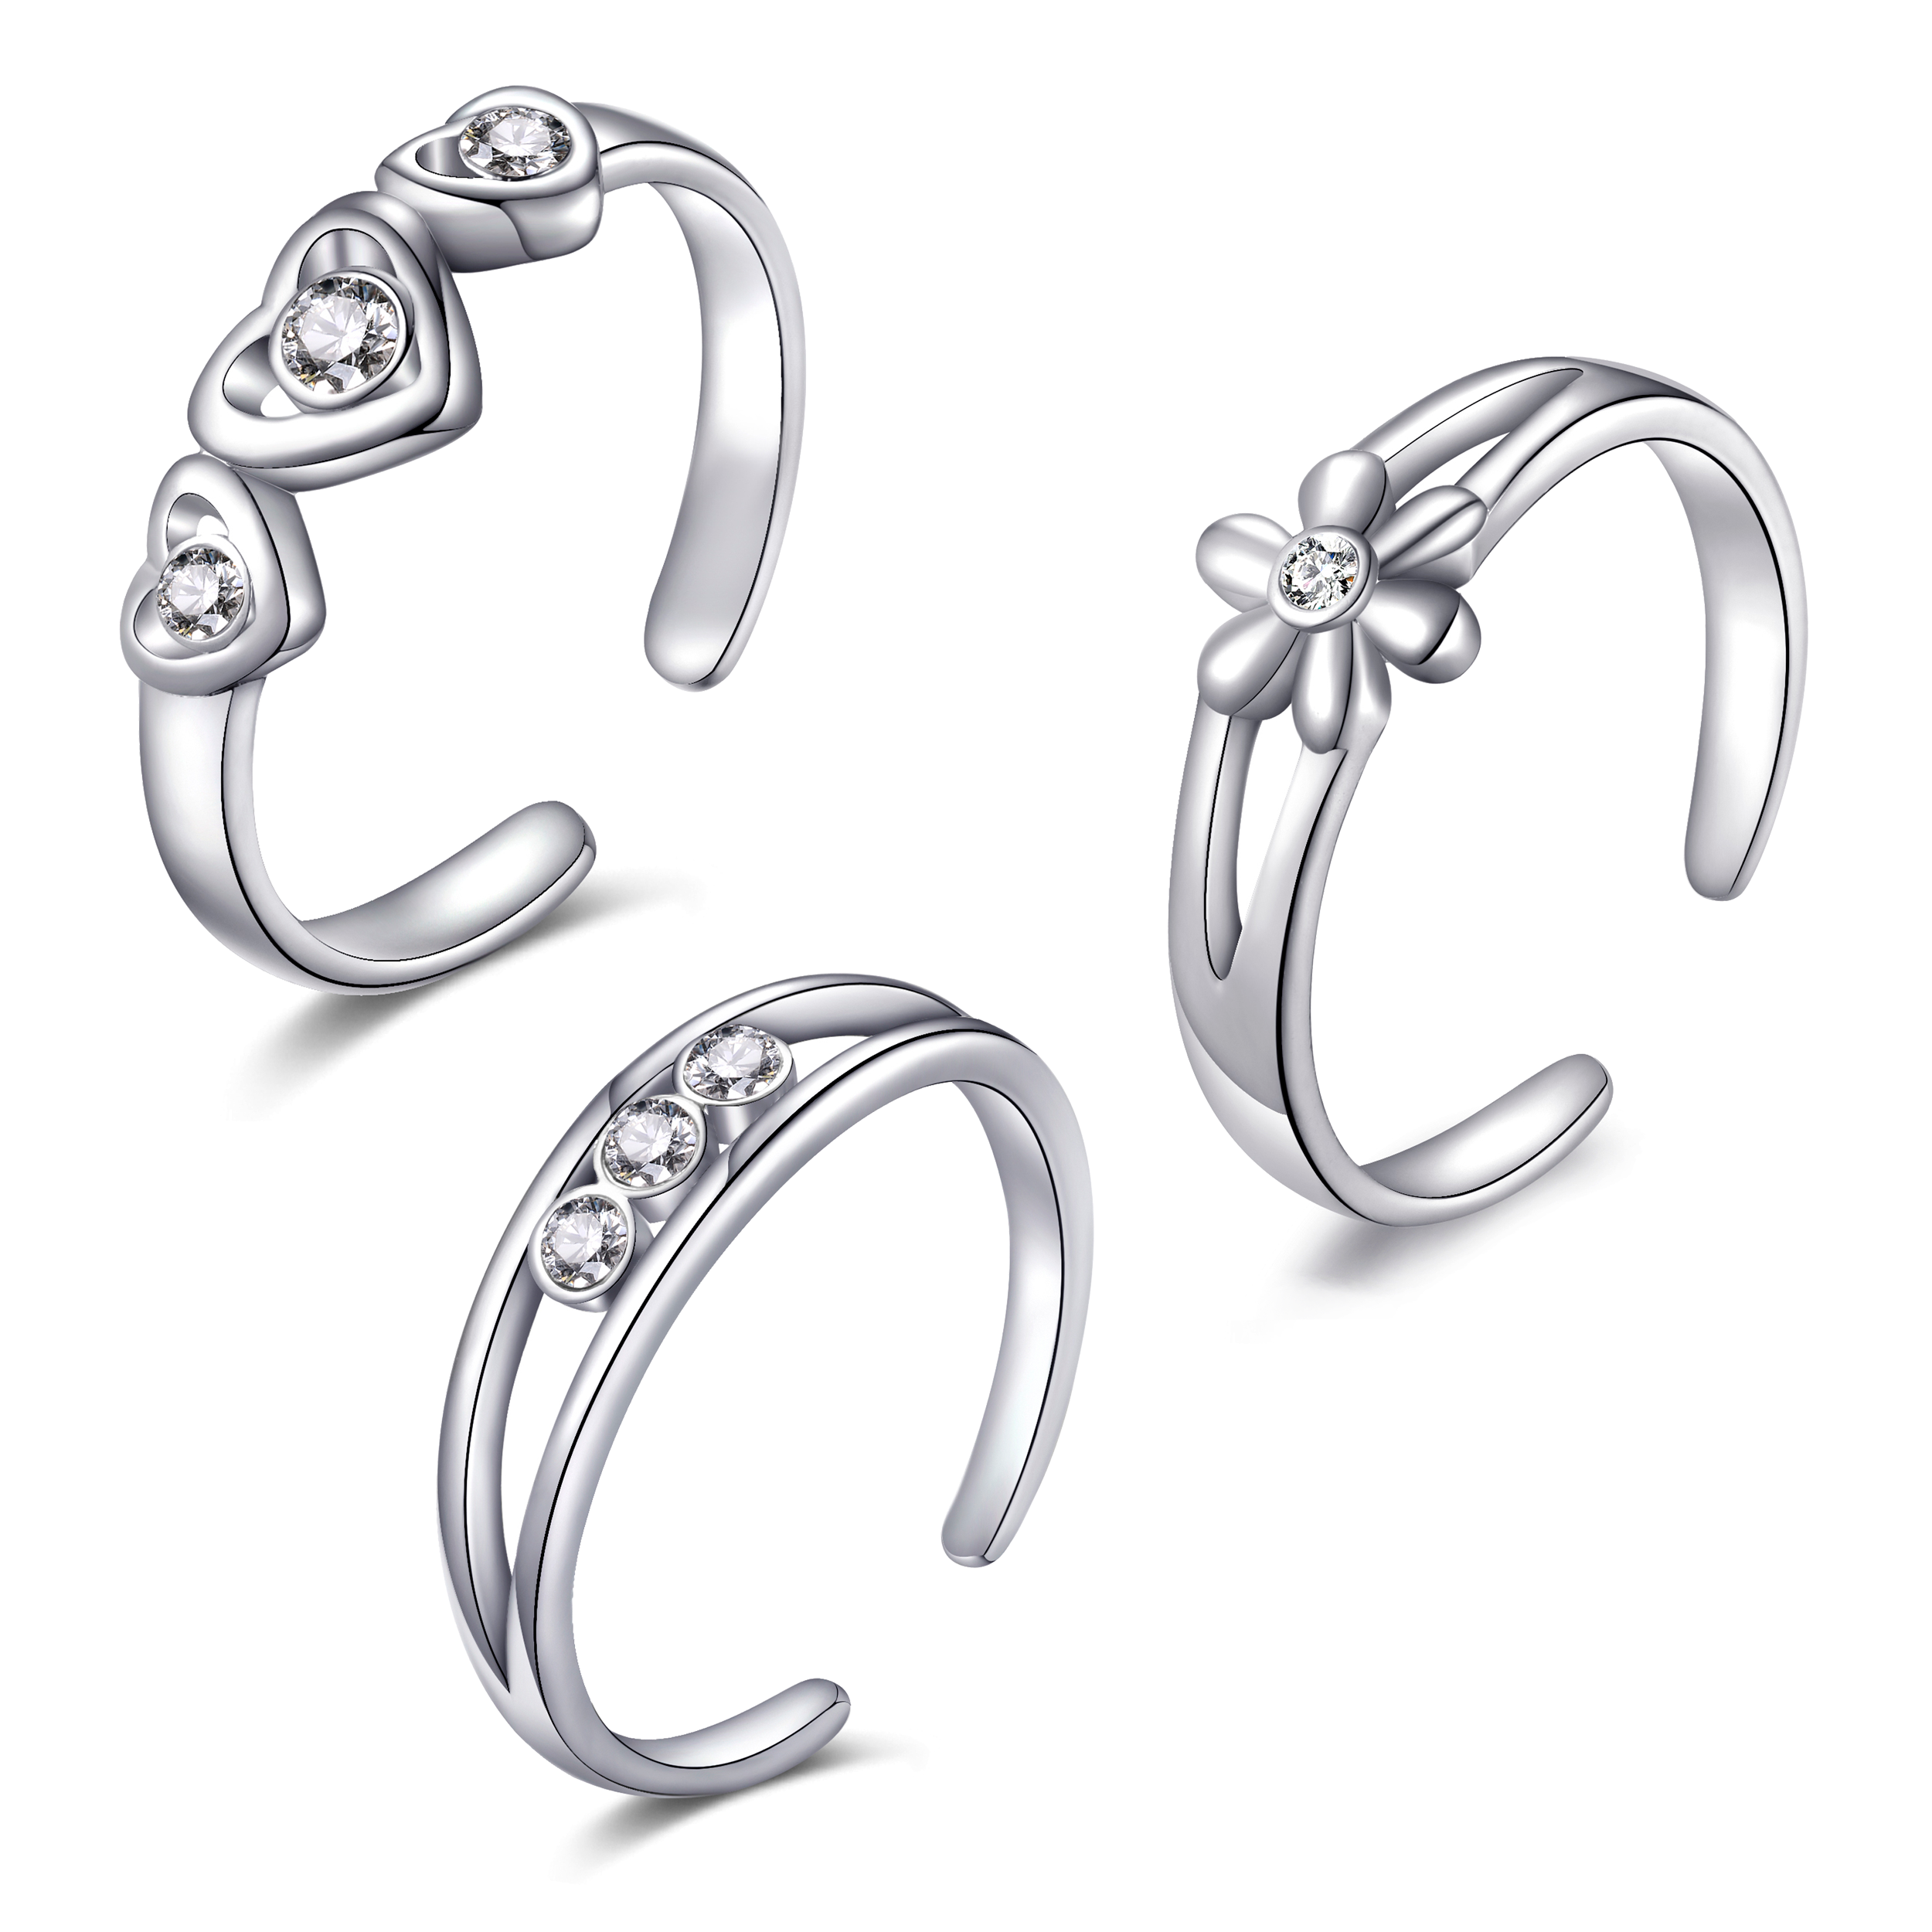 Set of Three Silver Plated Adjustable Toe Rings Created with Zircondia® Crystals